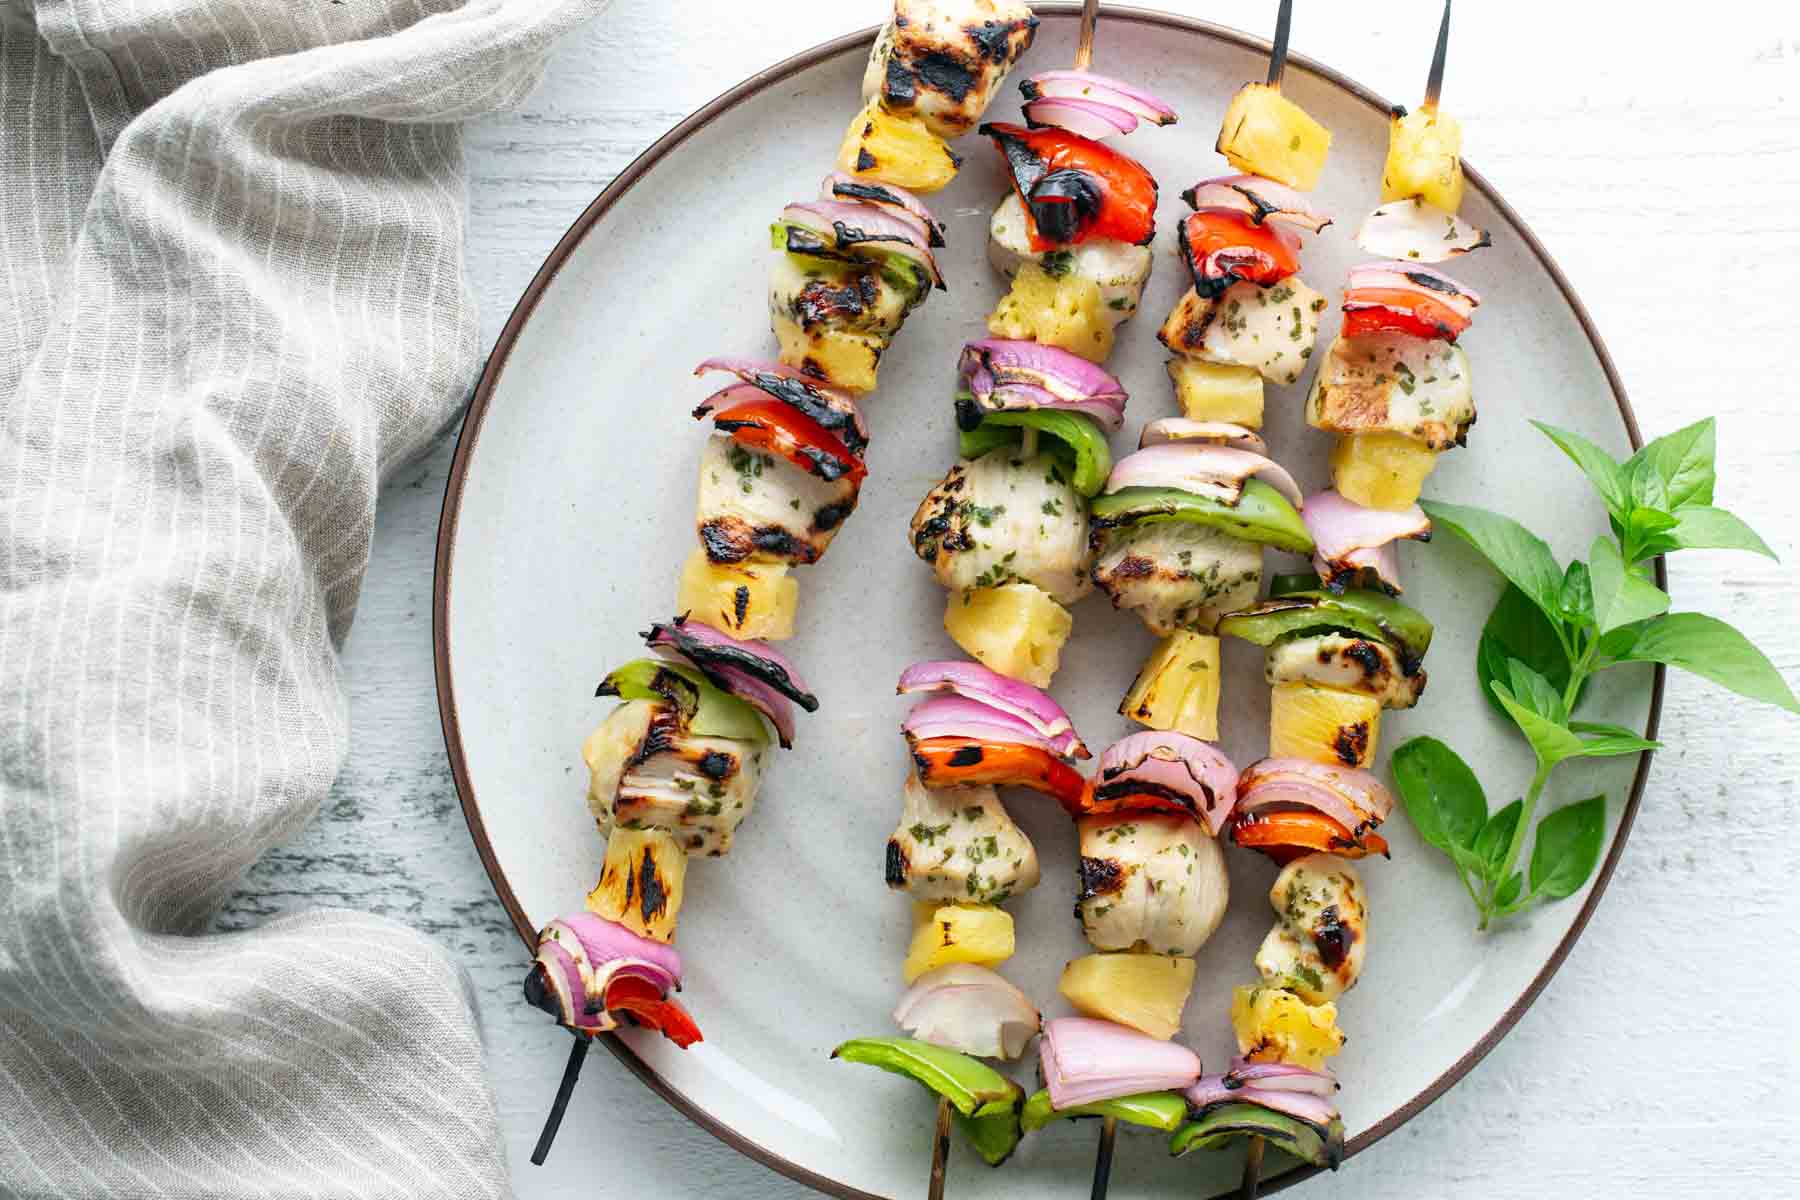 Plate with grilled chicken kebabs, skewered with bell peppers, red onions, and pineapple chunks, garnished with fresh herbs. A striped cloth napkin is beside the plate.